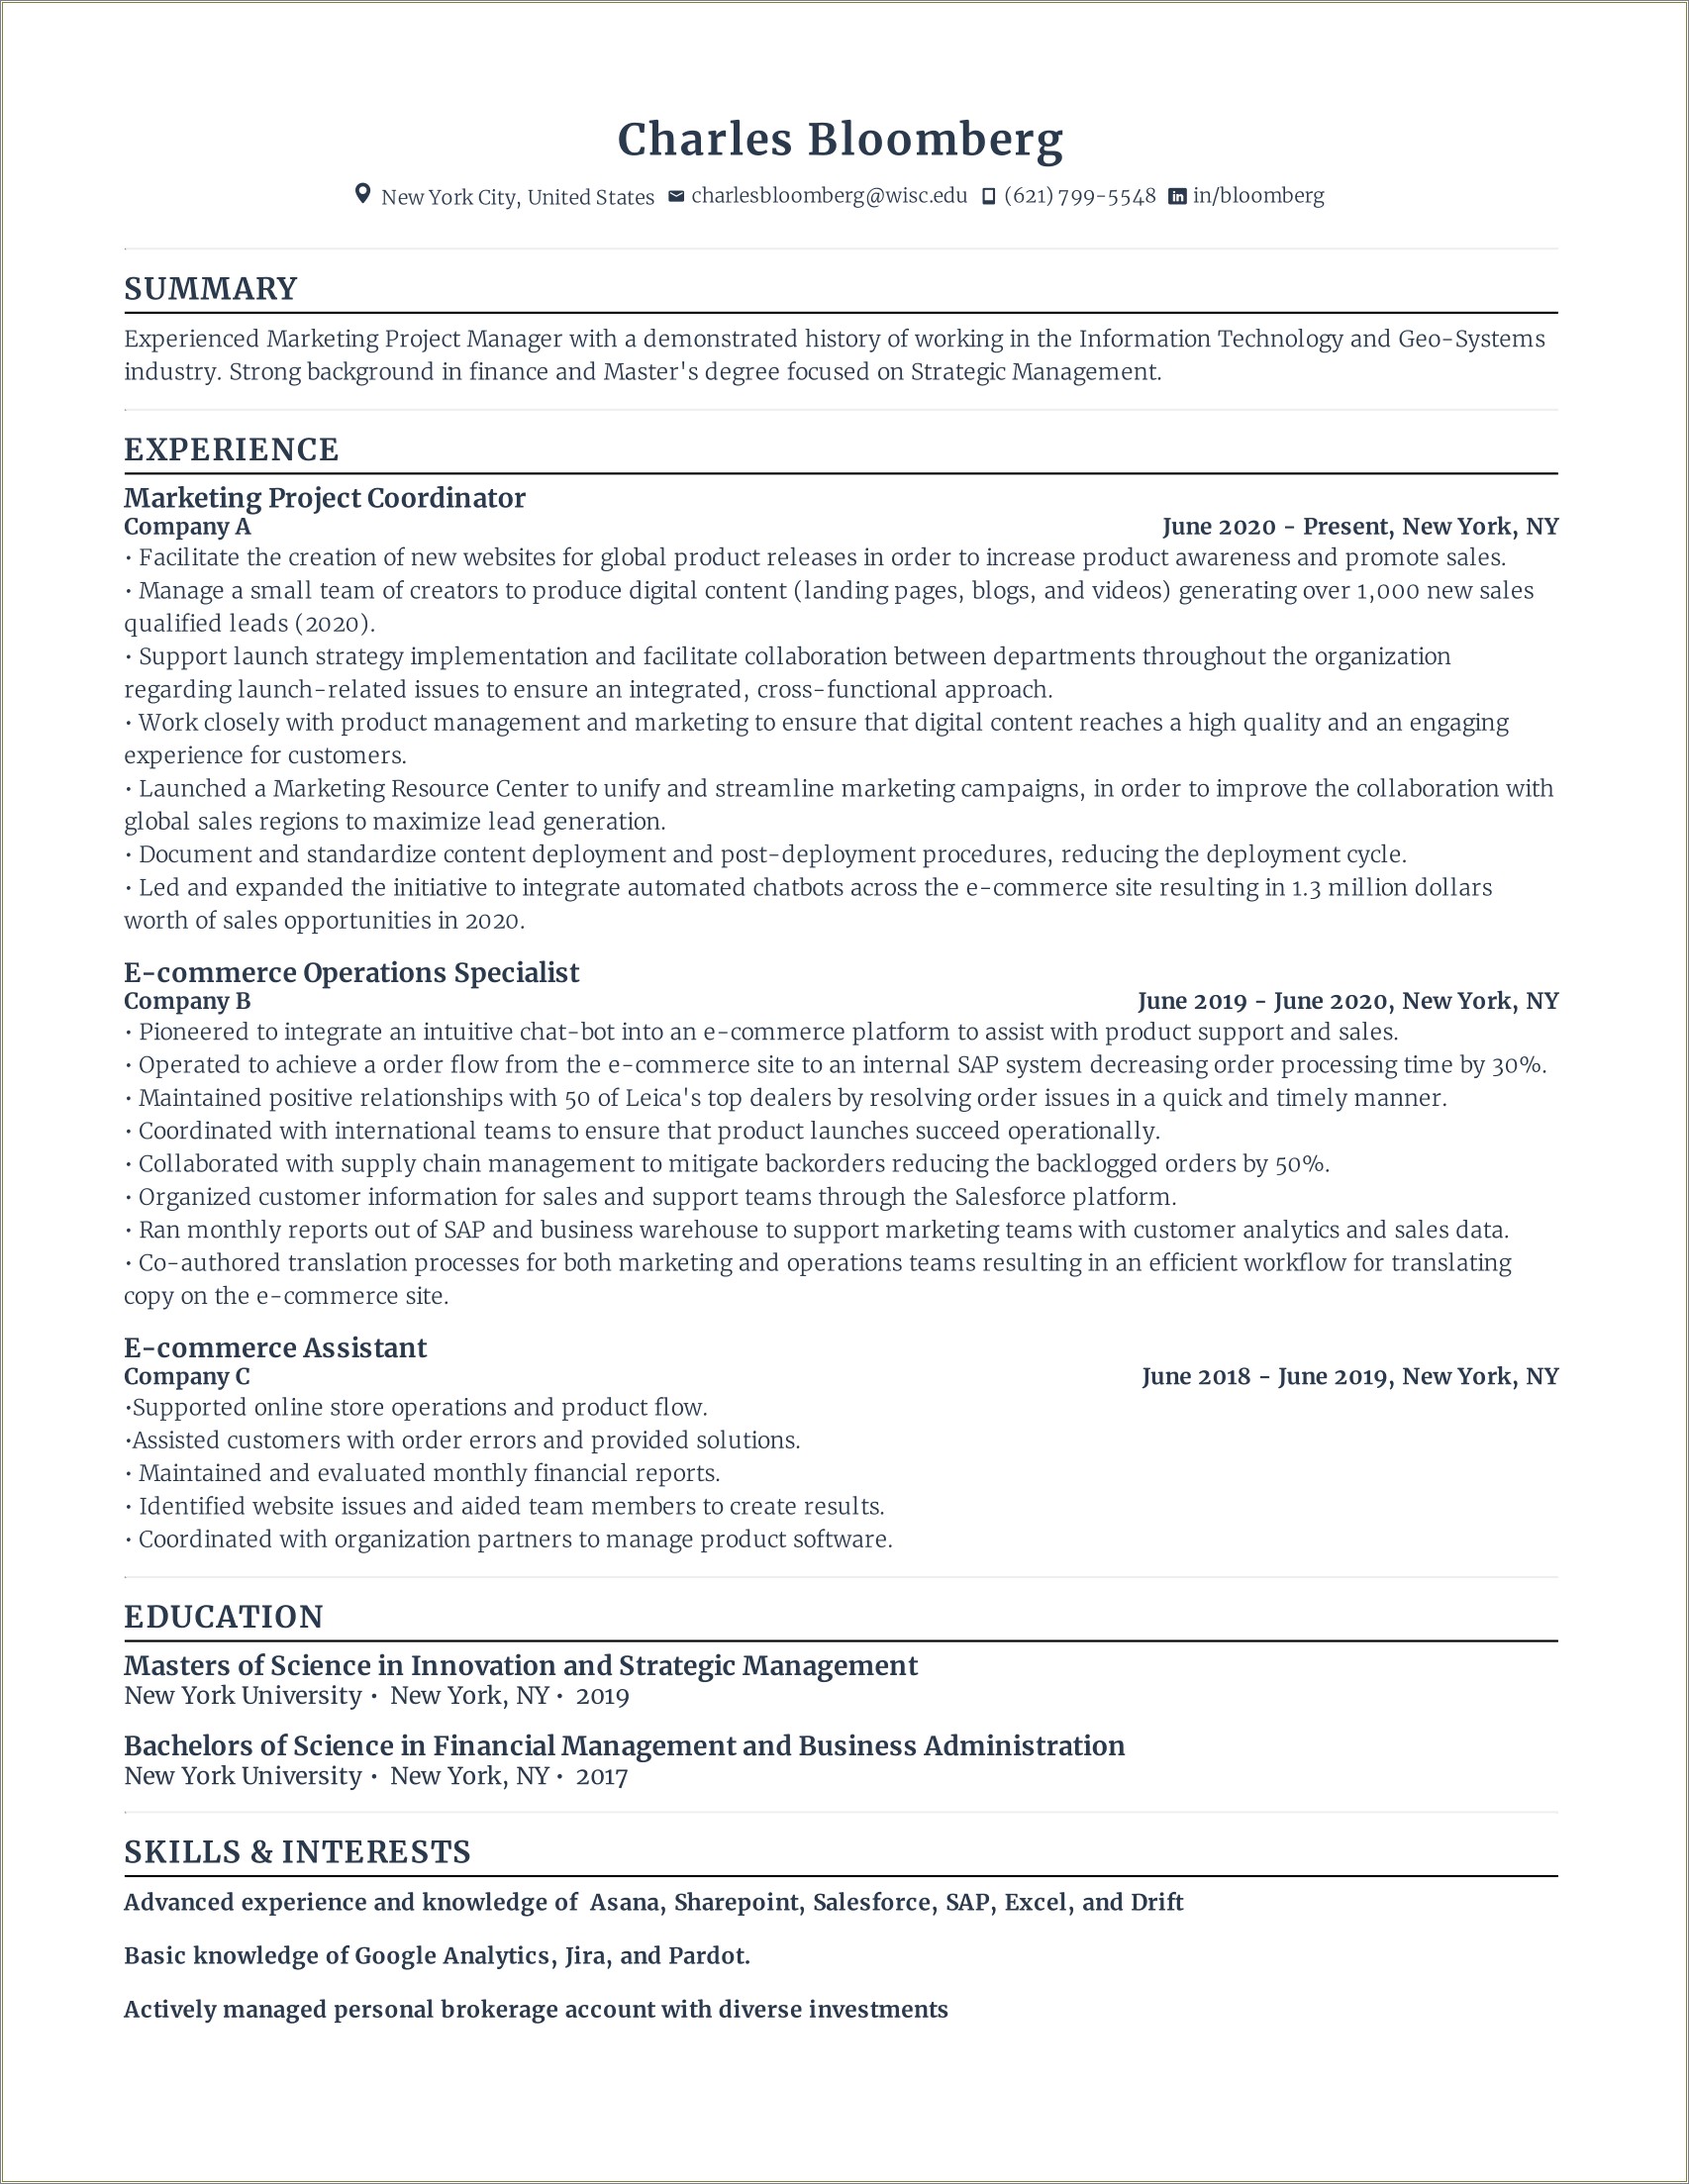 Product Manager Skills To List On Resume